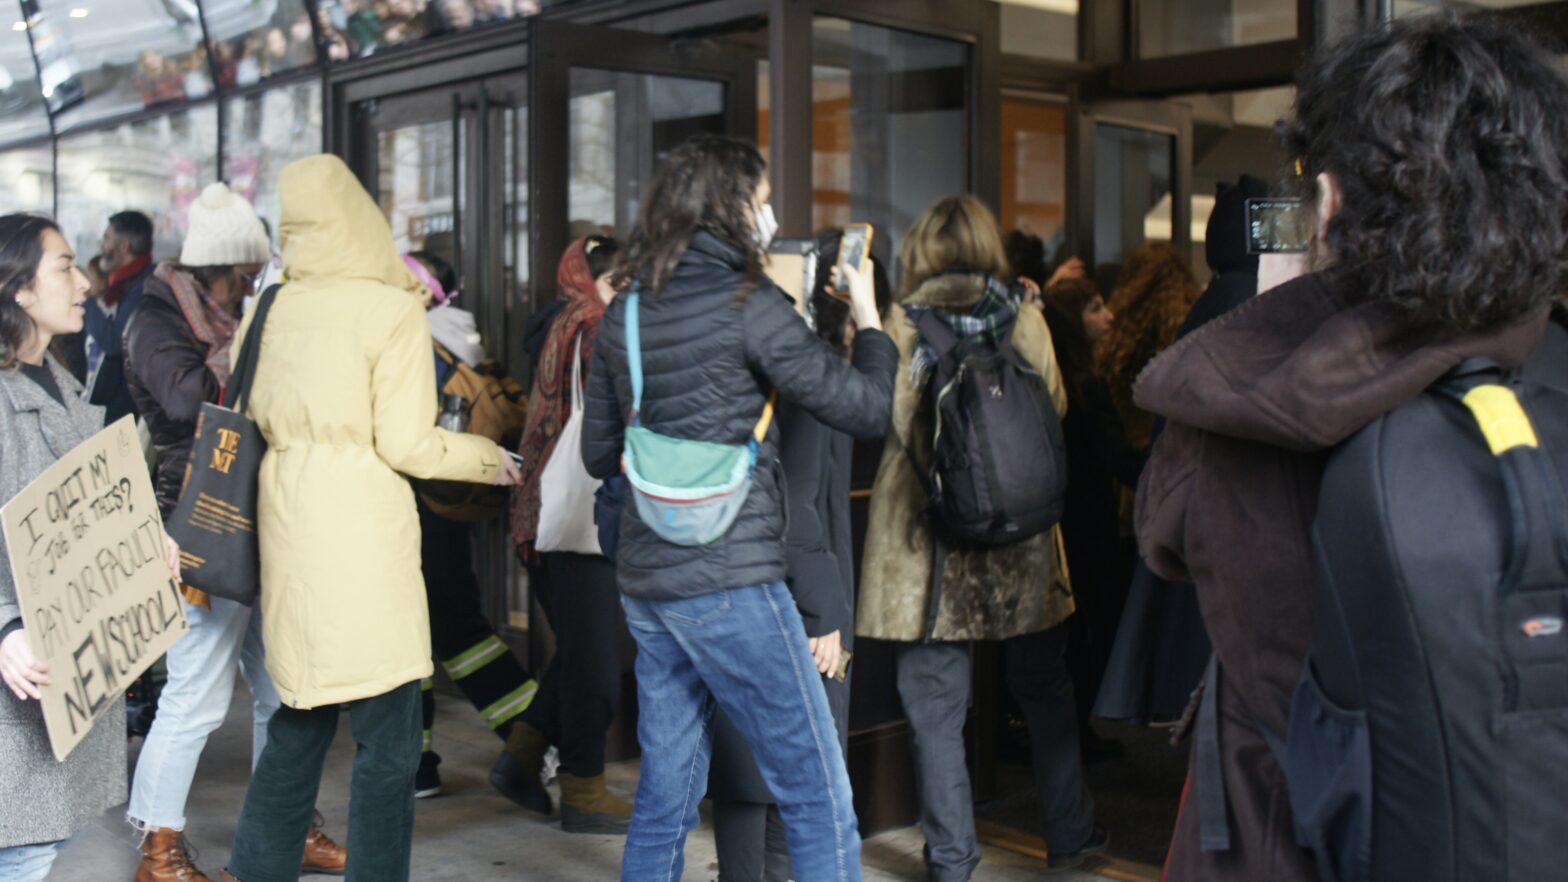 Group of people entering The New School’s University Center